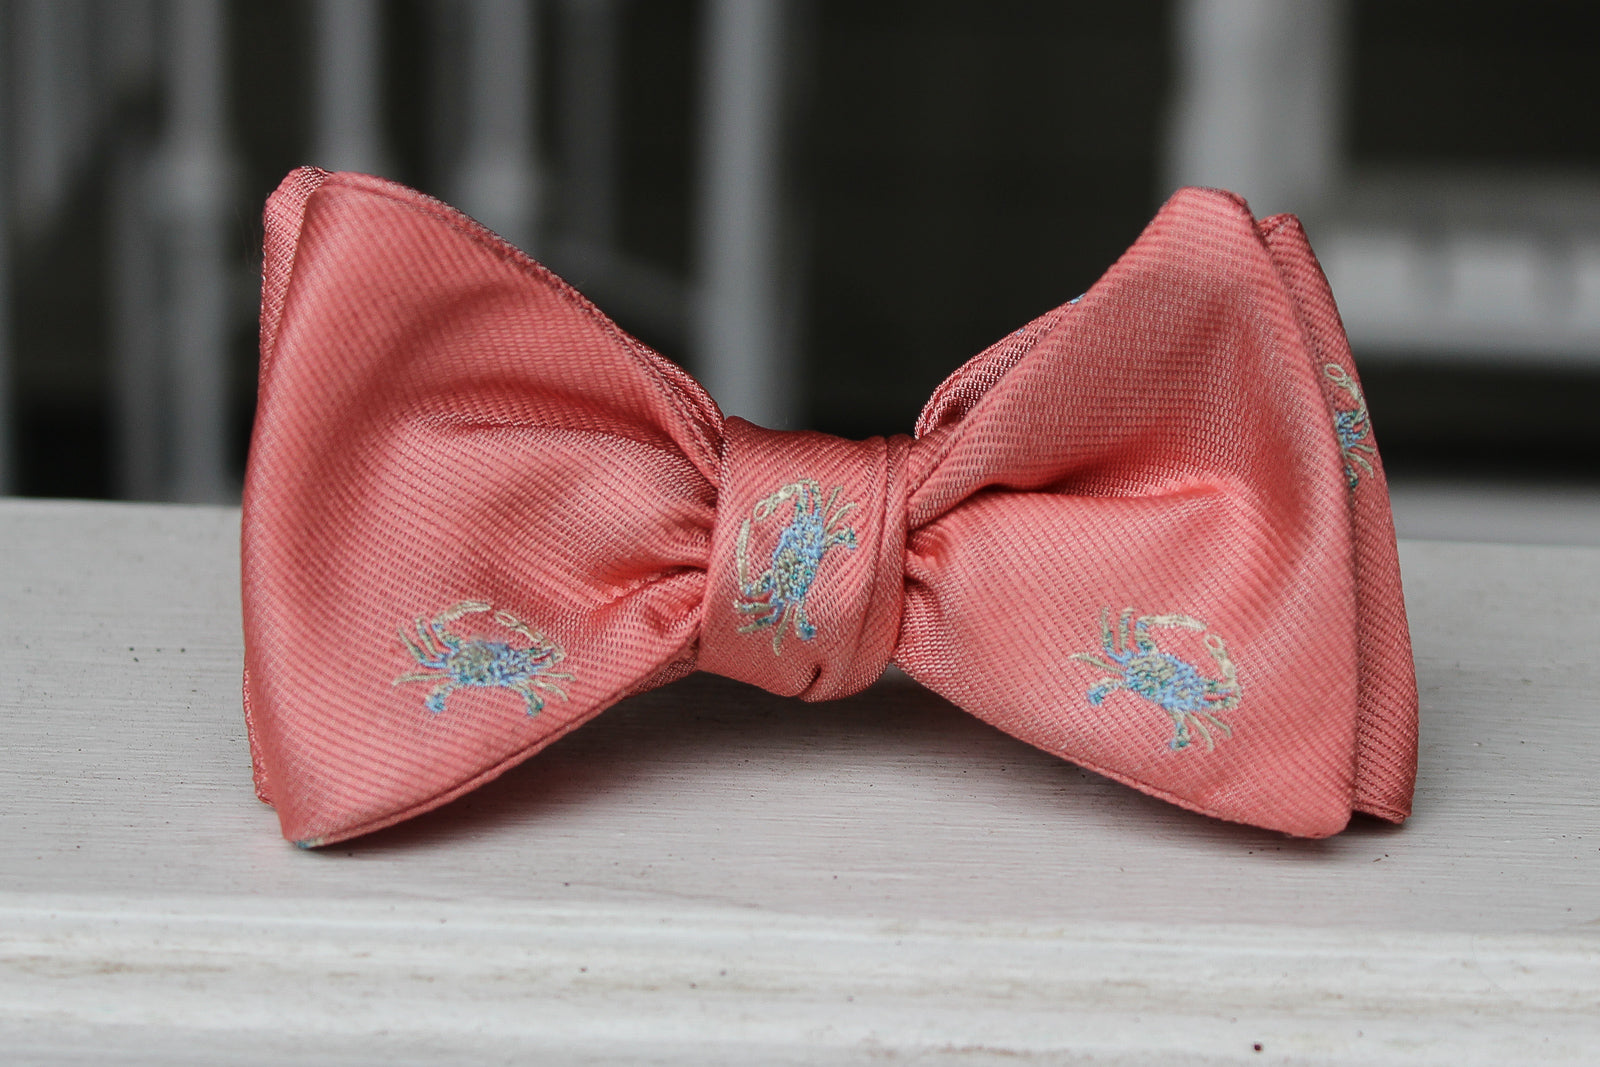 Coral men's bow tie made from silk.